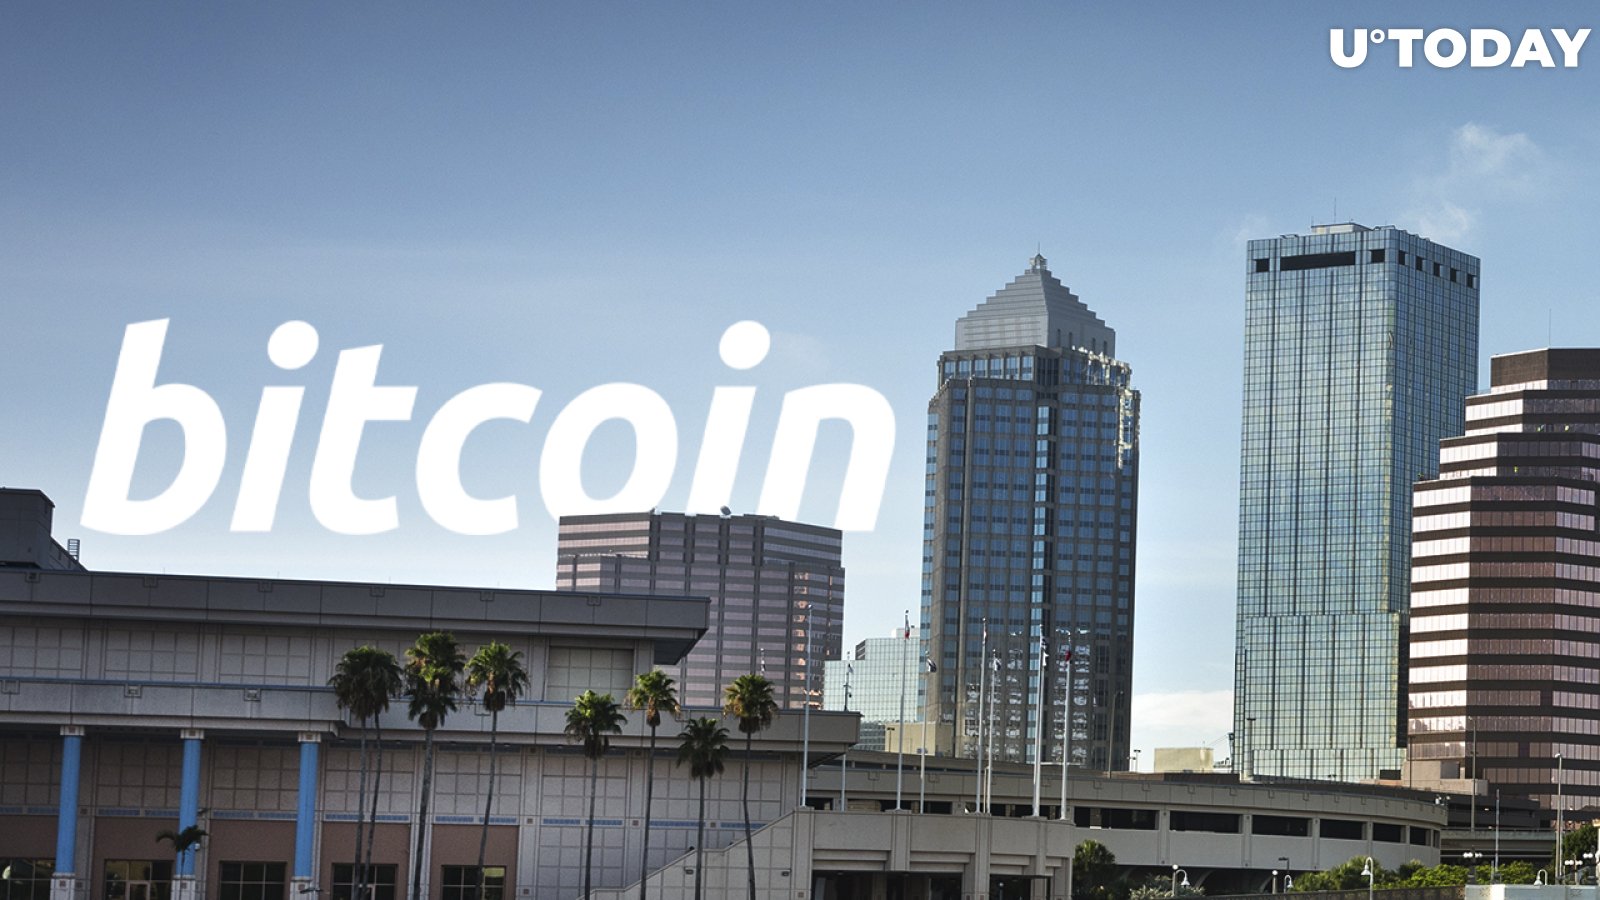 Tampa Mayor Is Willing to Be Paid in Bitcoin